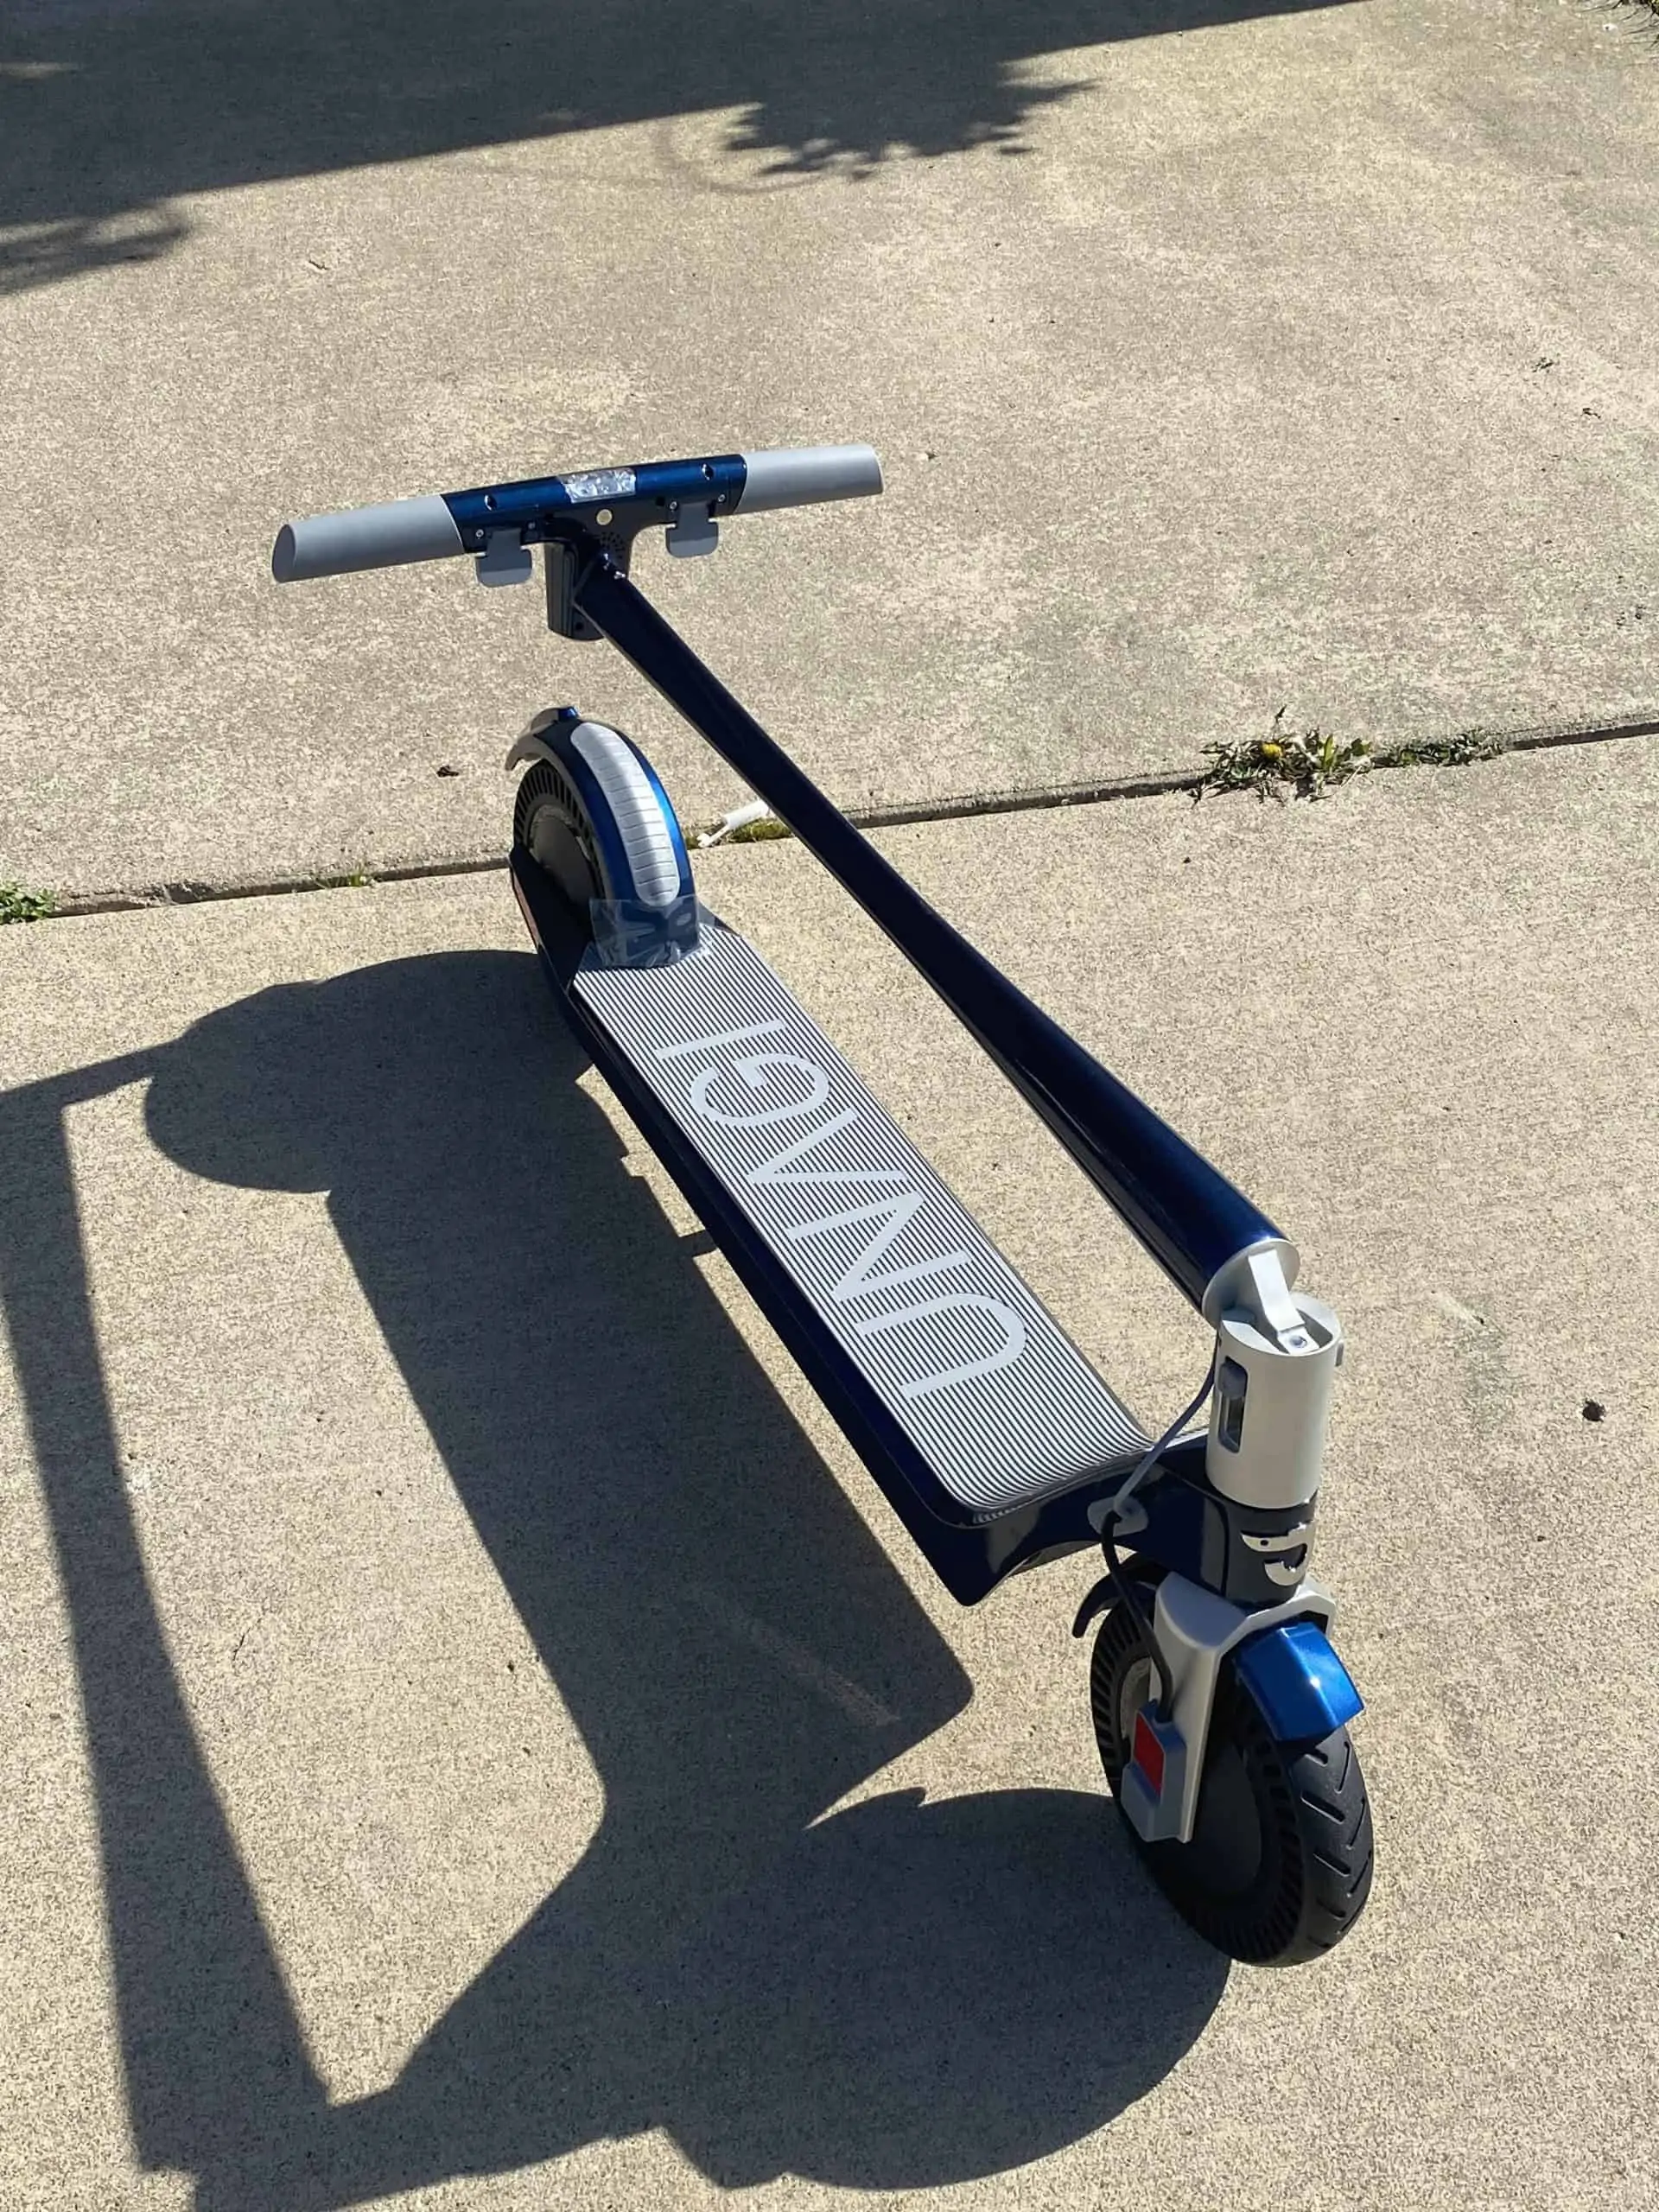 Unagi Electric Scooter Review – The Model One E500